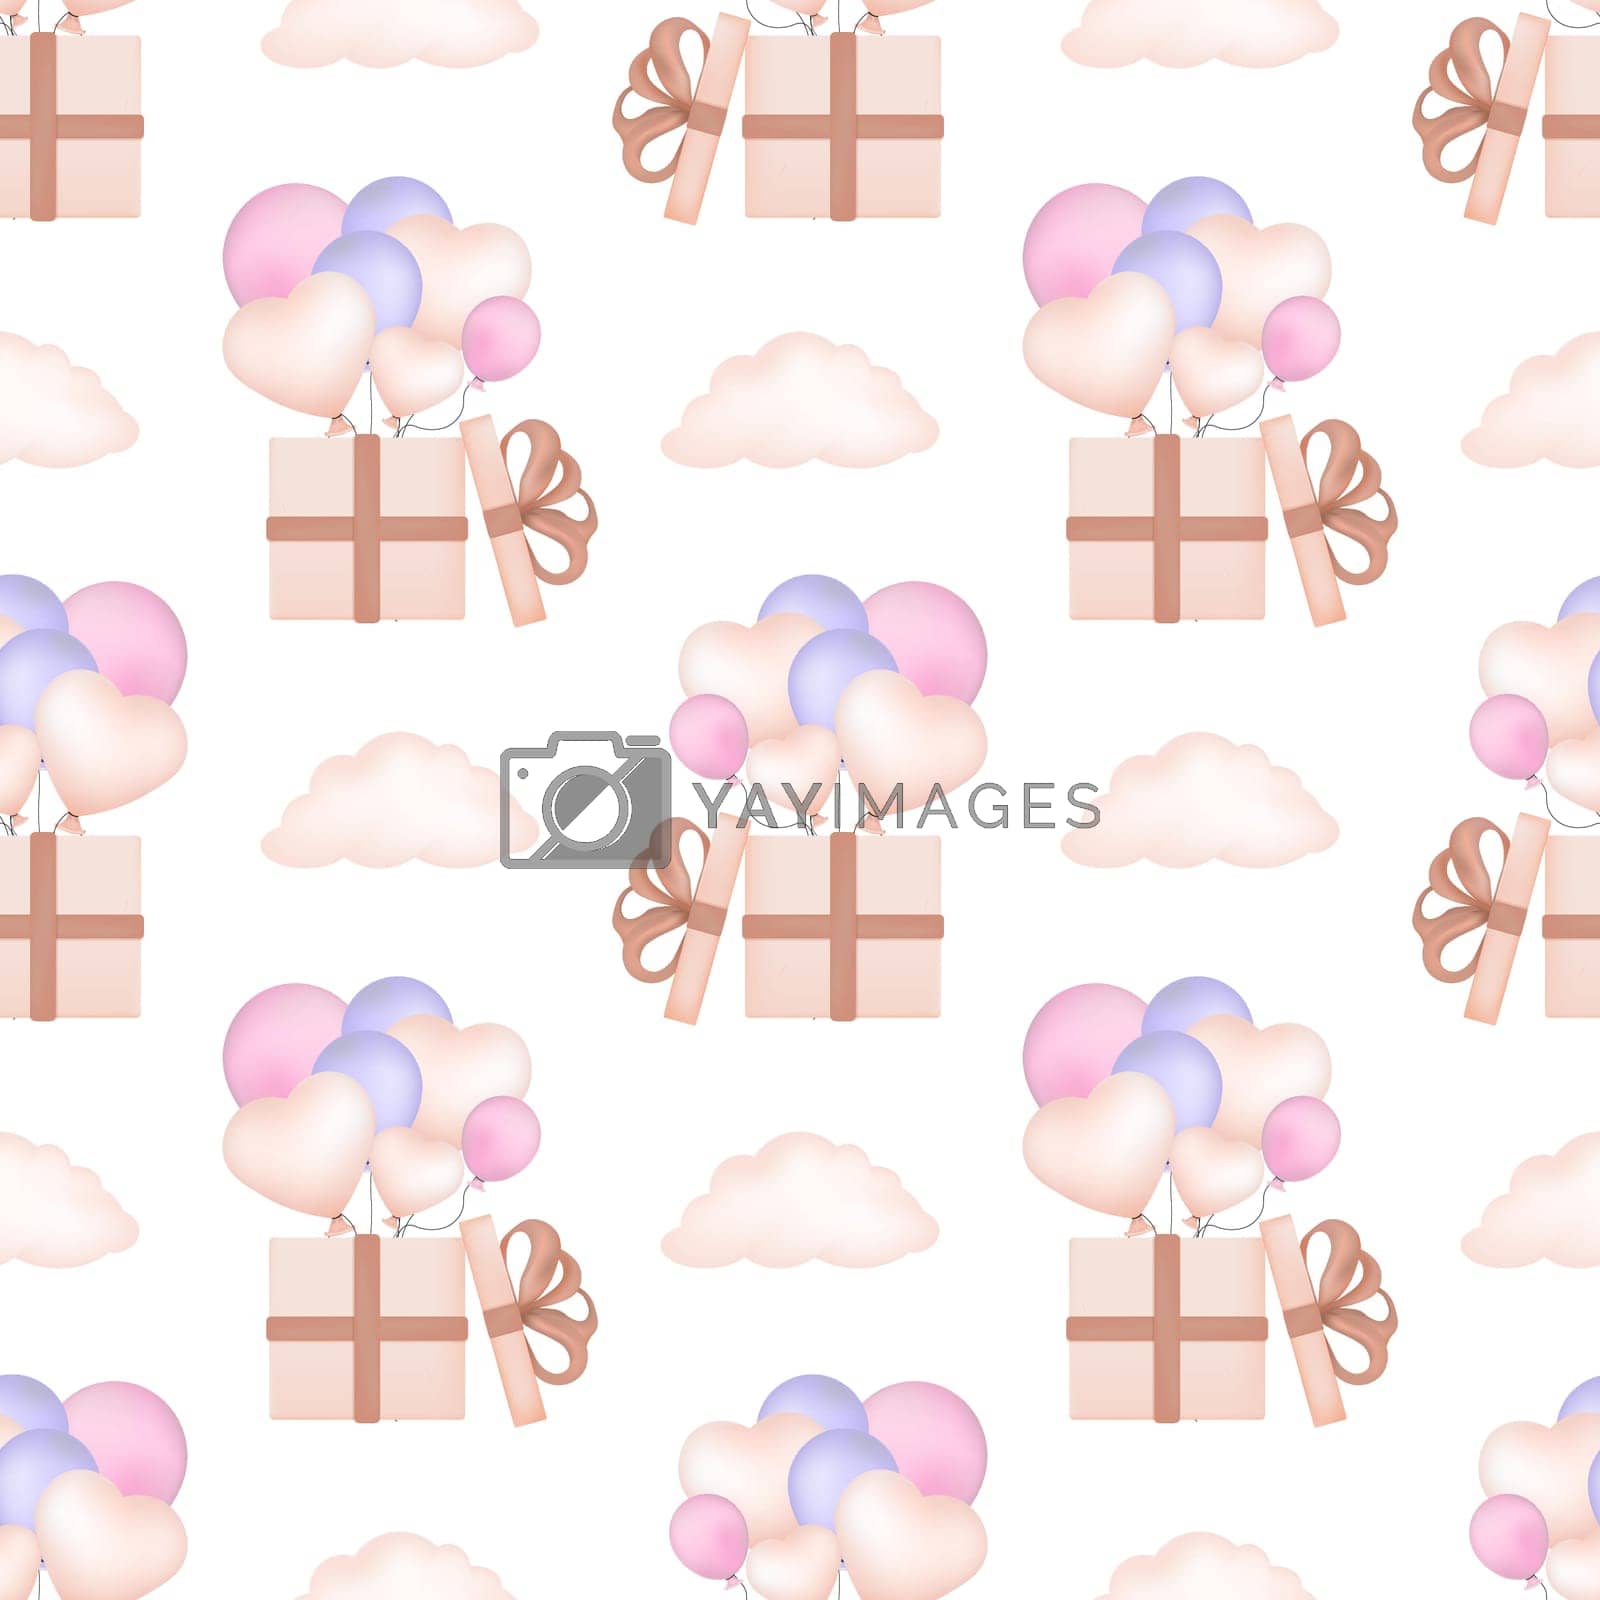 Royalty free image of Seamless vector pattern with balloons. Baby shower party ornament. Gentle pattern for babies and newborns. by annatarankova